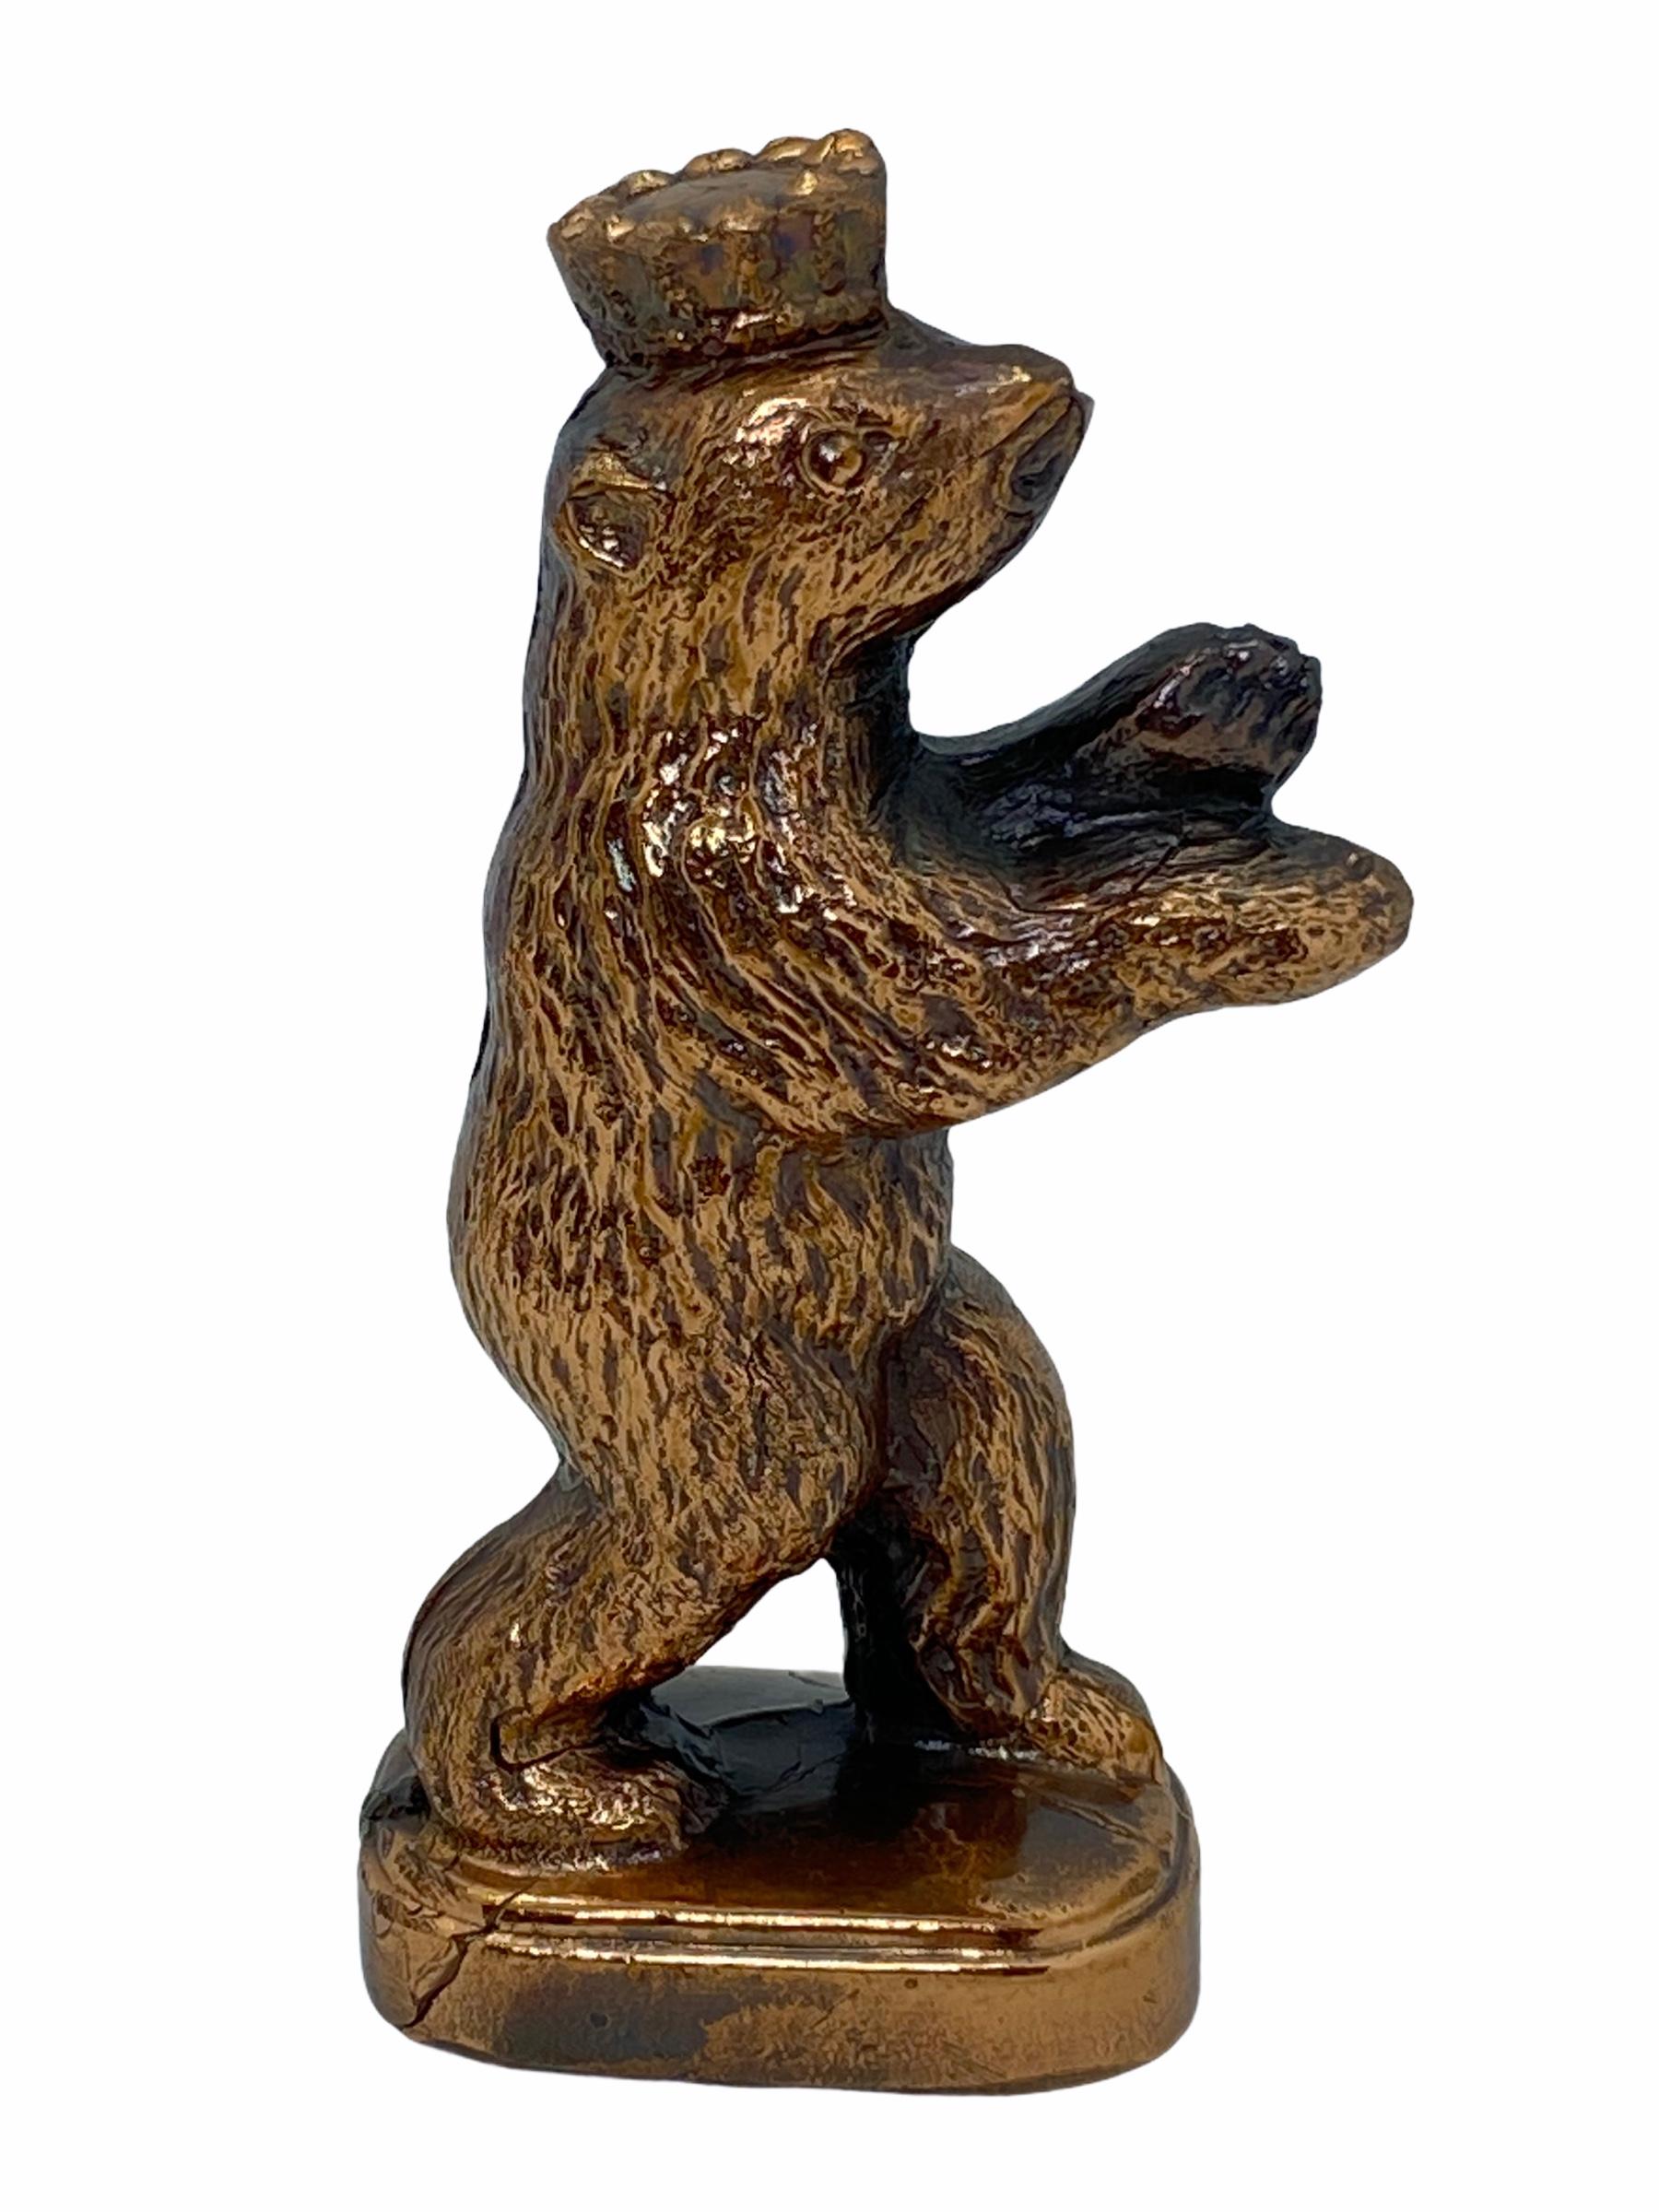 A classic decorative Berlin bear statue. Some wear with a nice patina, but this is old-age. Made of metal. This item was bought as a souvenir in Berlin and was made in the mid-20th century probably to the end of 1960s.